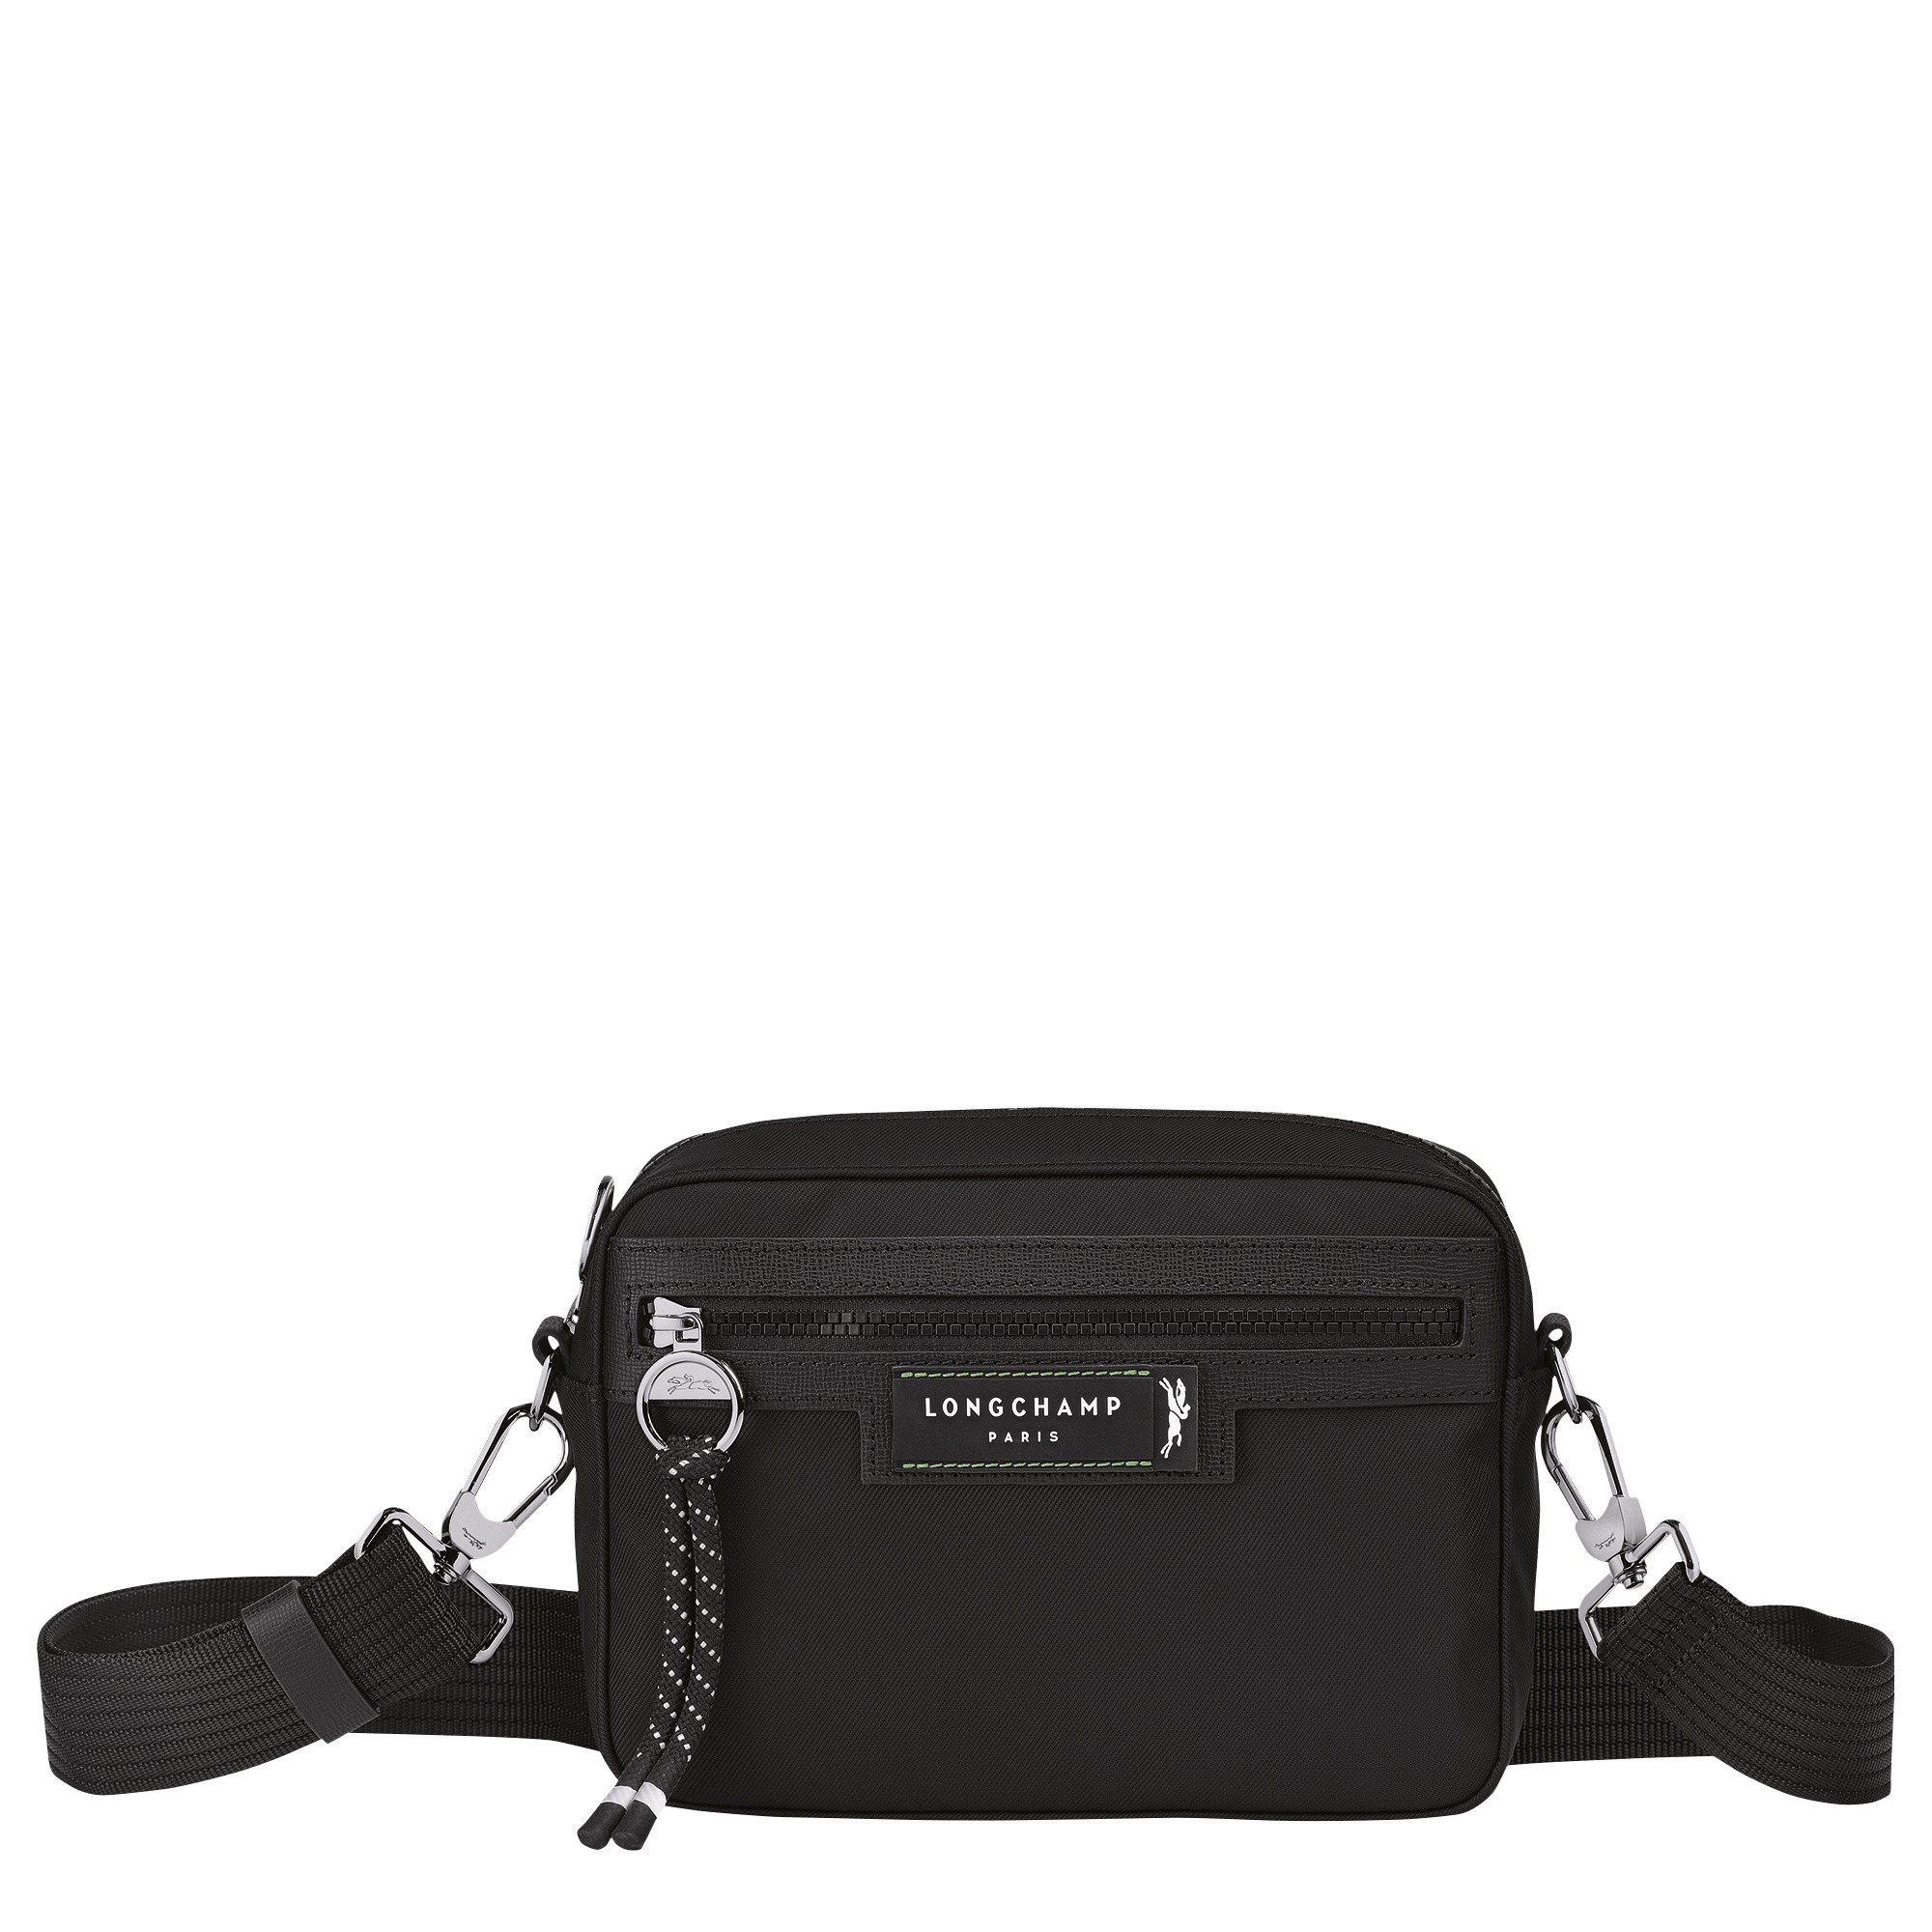 Le Pliage Energy S Camera bag Black - Recycled canvas - 1